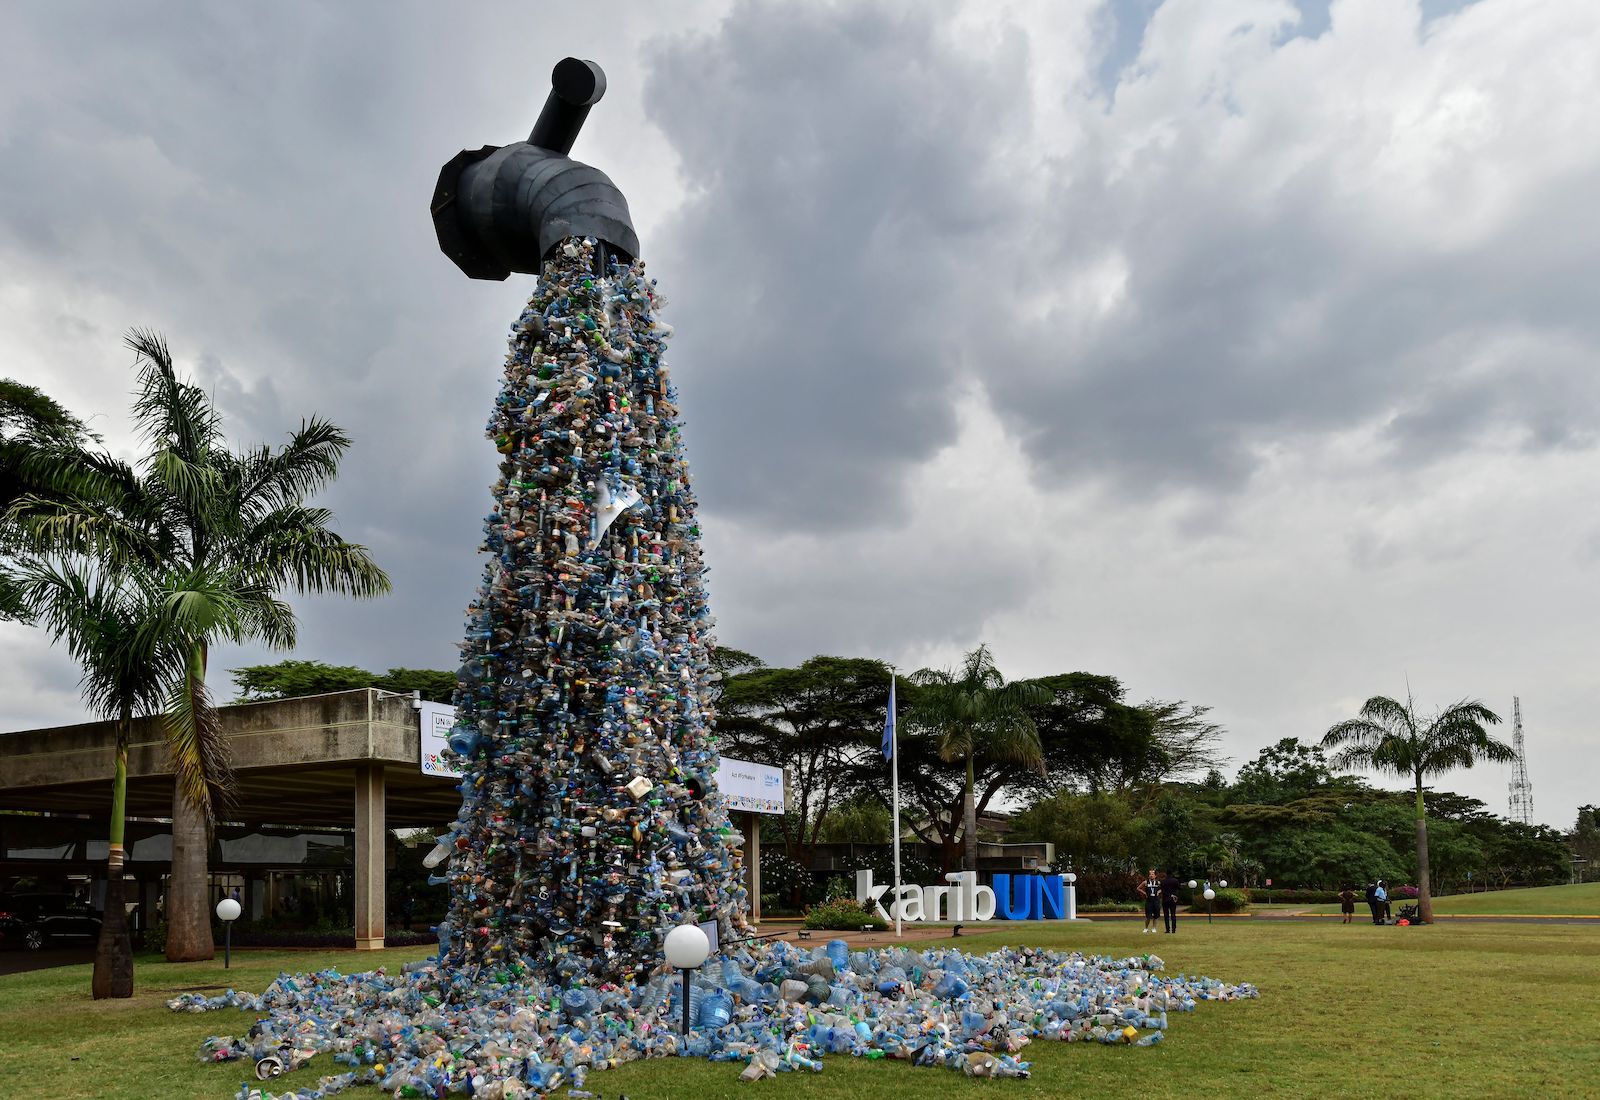 Sculpture made to look like a large water tap with a shower of plastic bottles coming out of it; palm trees in background